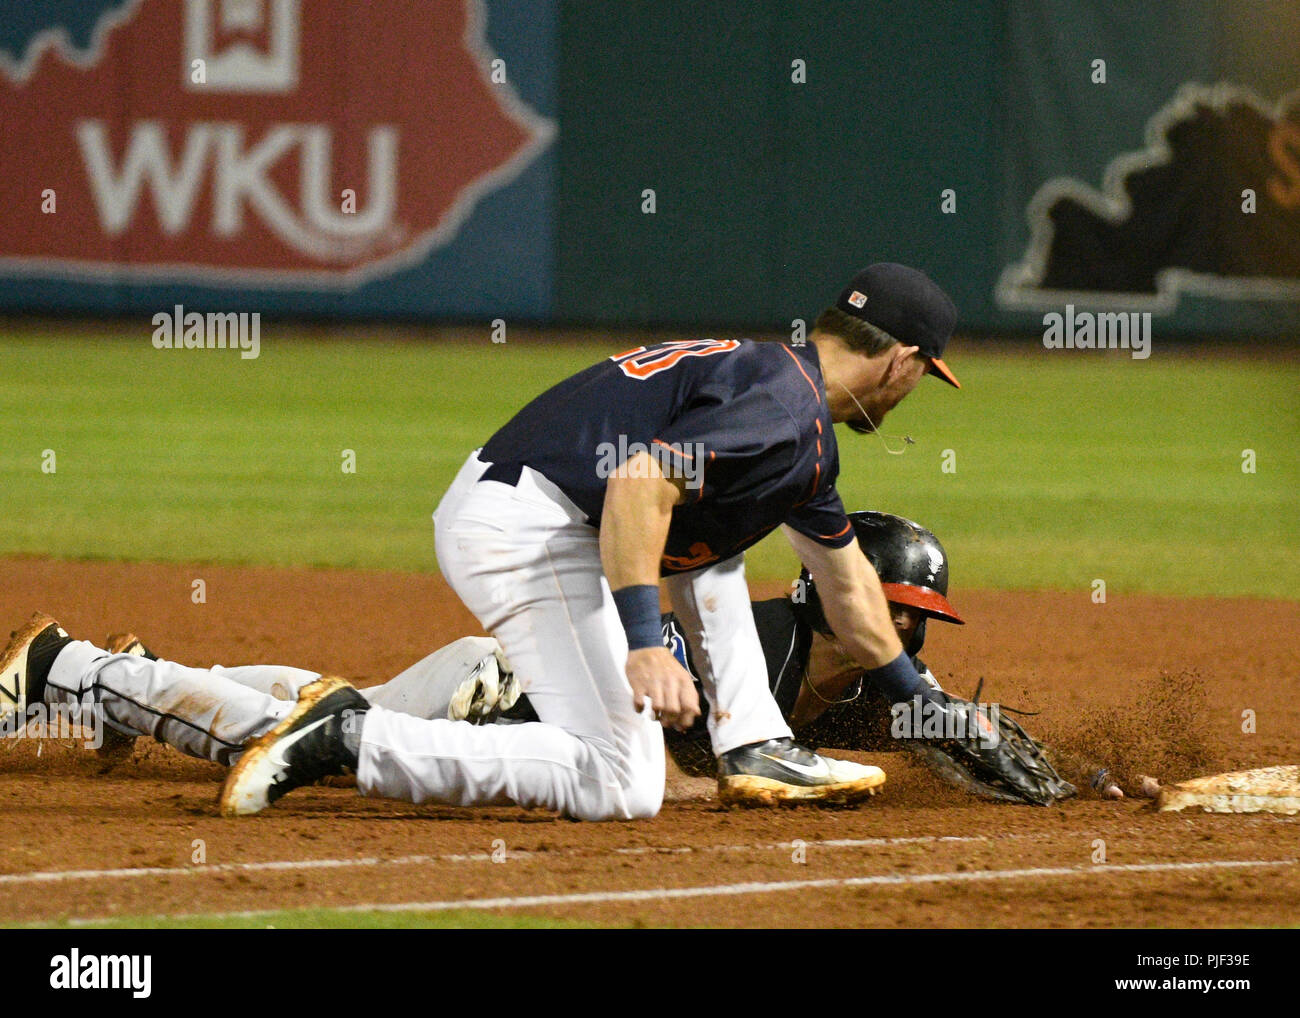 The Second Round. 6th Sep, 2018. USA Bowling Green Hot Rods first baseman Jim Haley (20) tags Lansing Lugnuts center fielder Reggie Pruitt (5) as retries to get back after being picked off during a Mid West League series between the Lansing Lugnuts and the Bowling Green Hot Rods in Bowling Green, KY st Bowling Green Ballpark. Hot Rods sweep Lugnuts and advance to the second round. (Mandatory Photo Credit: Steve Roberts/CSM) Credit: csm/Alamy Live News Stock Photo